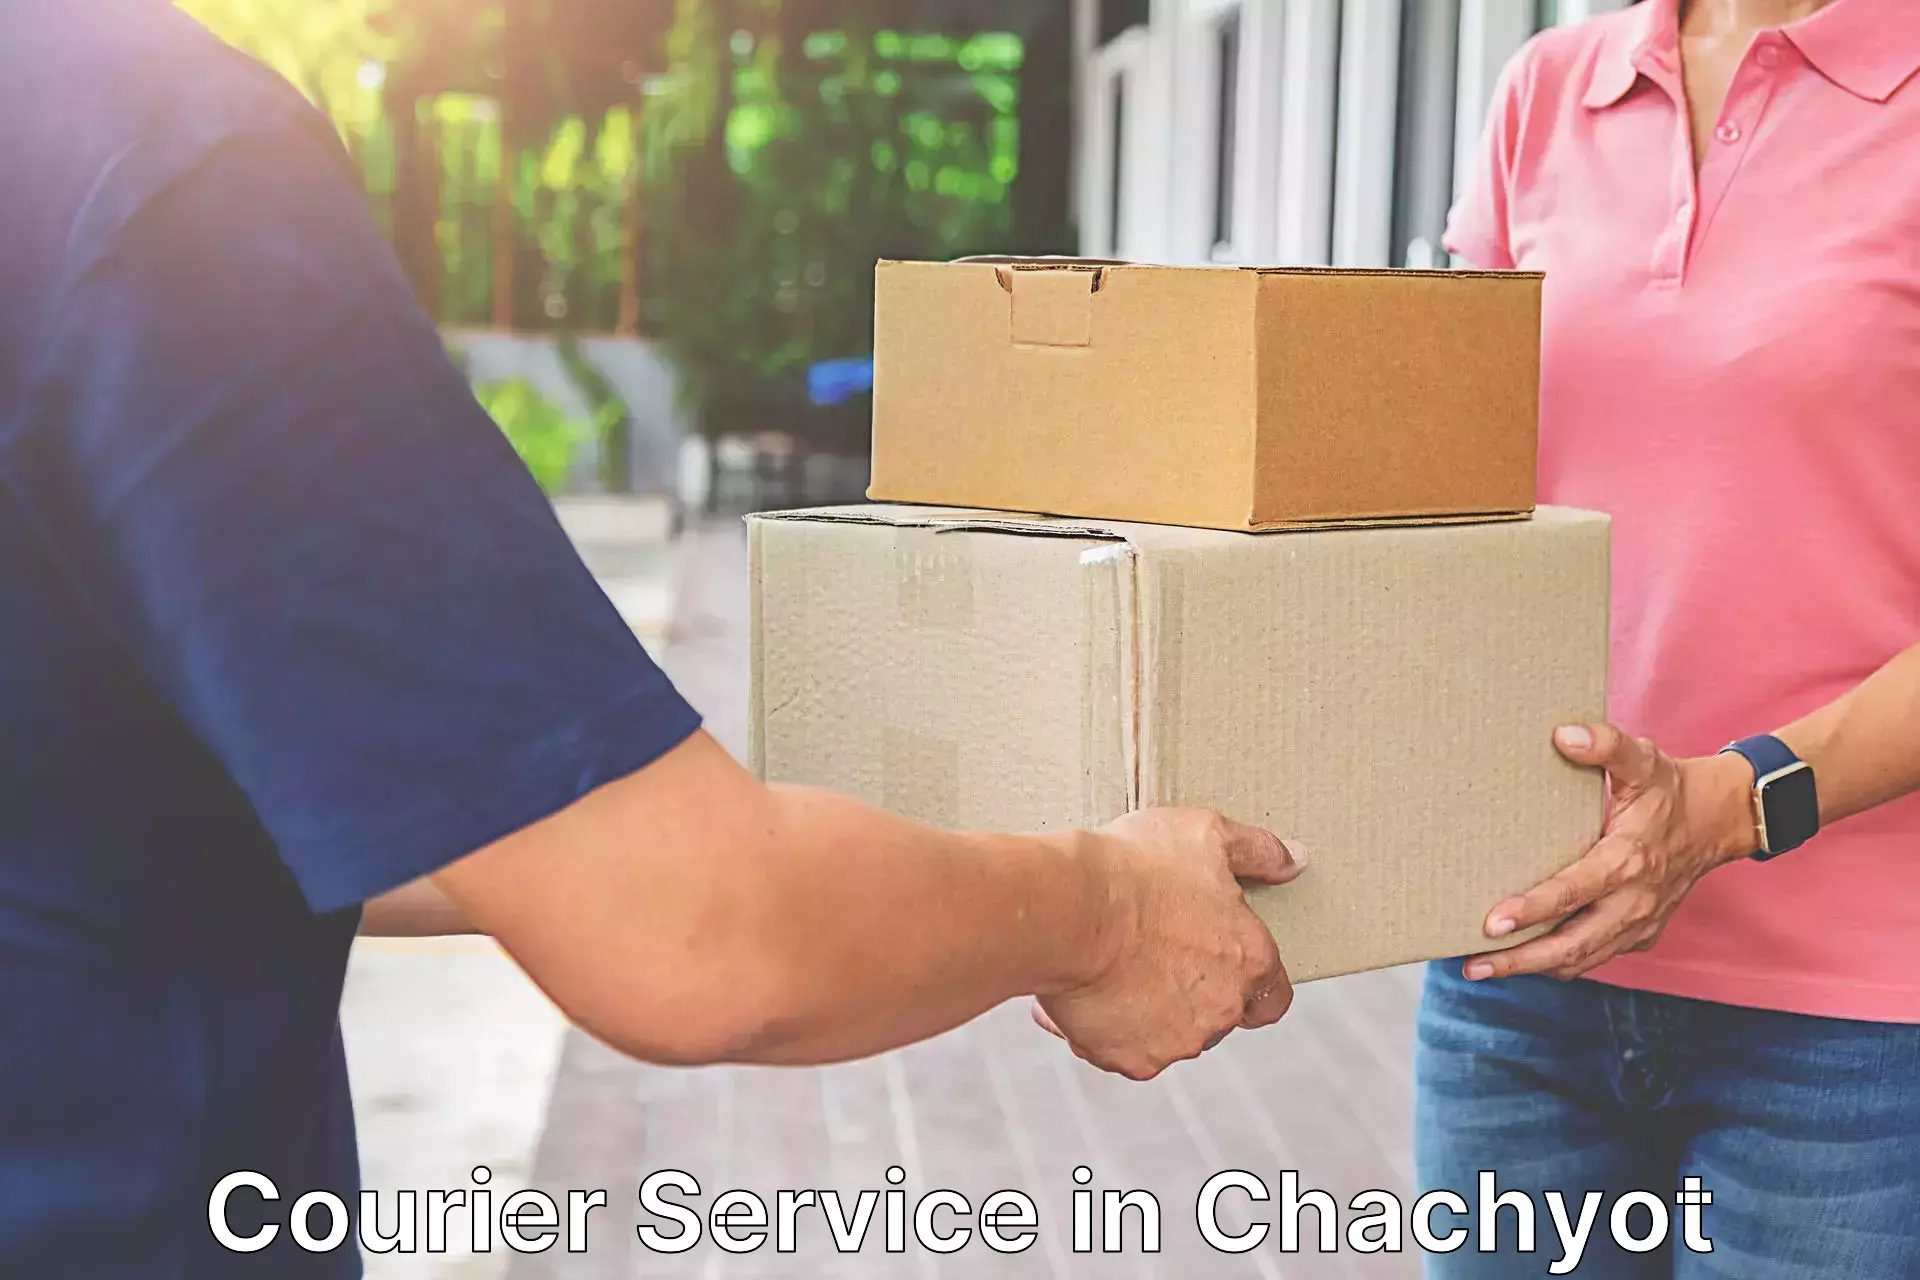 Express delivery solutions in Chachyot